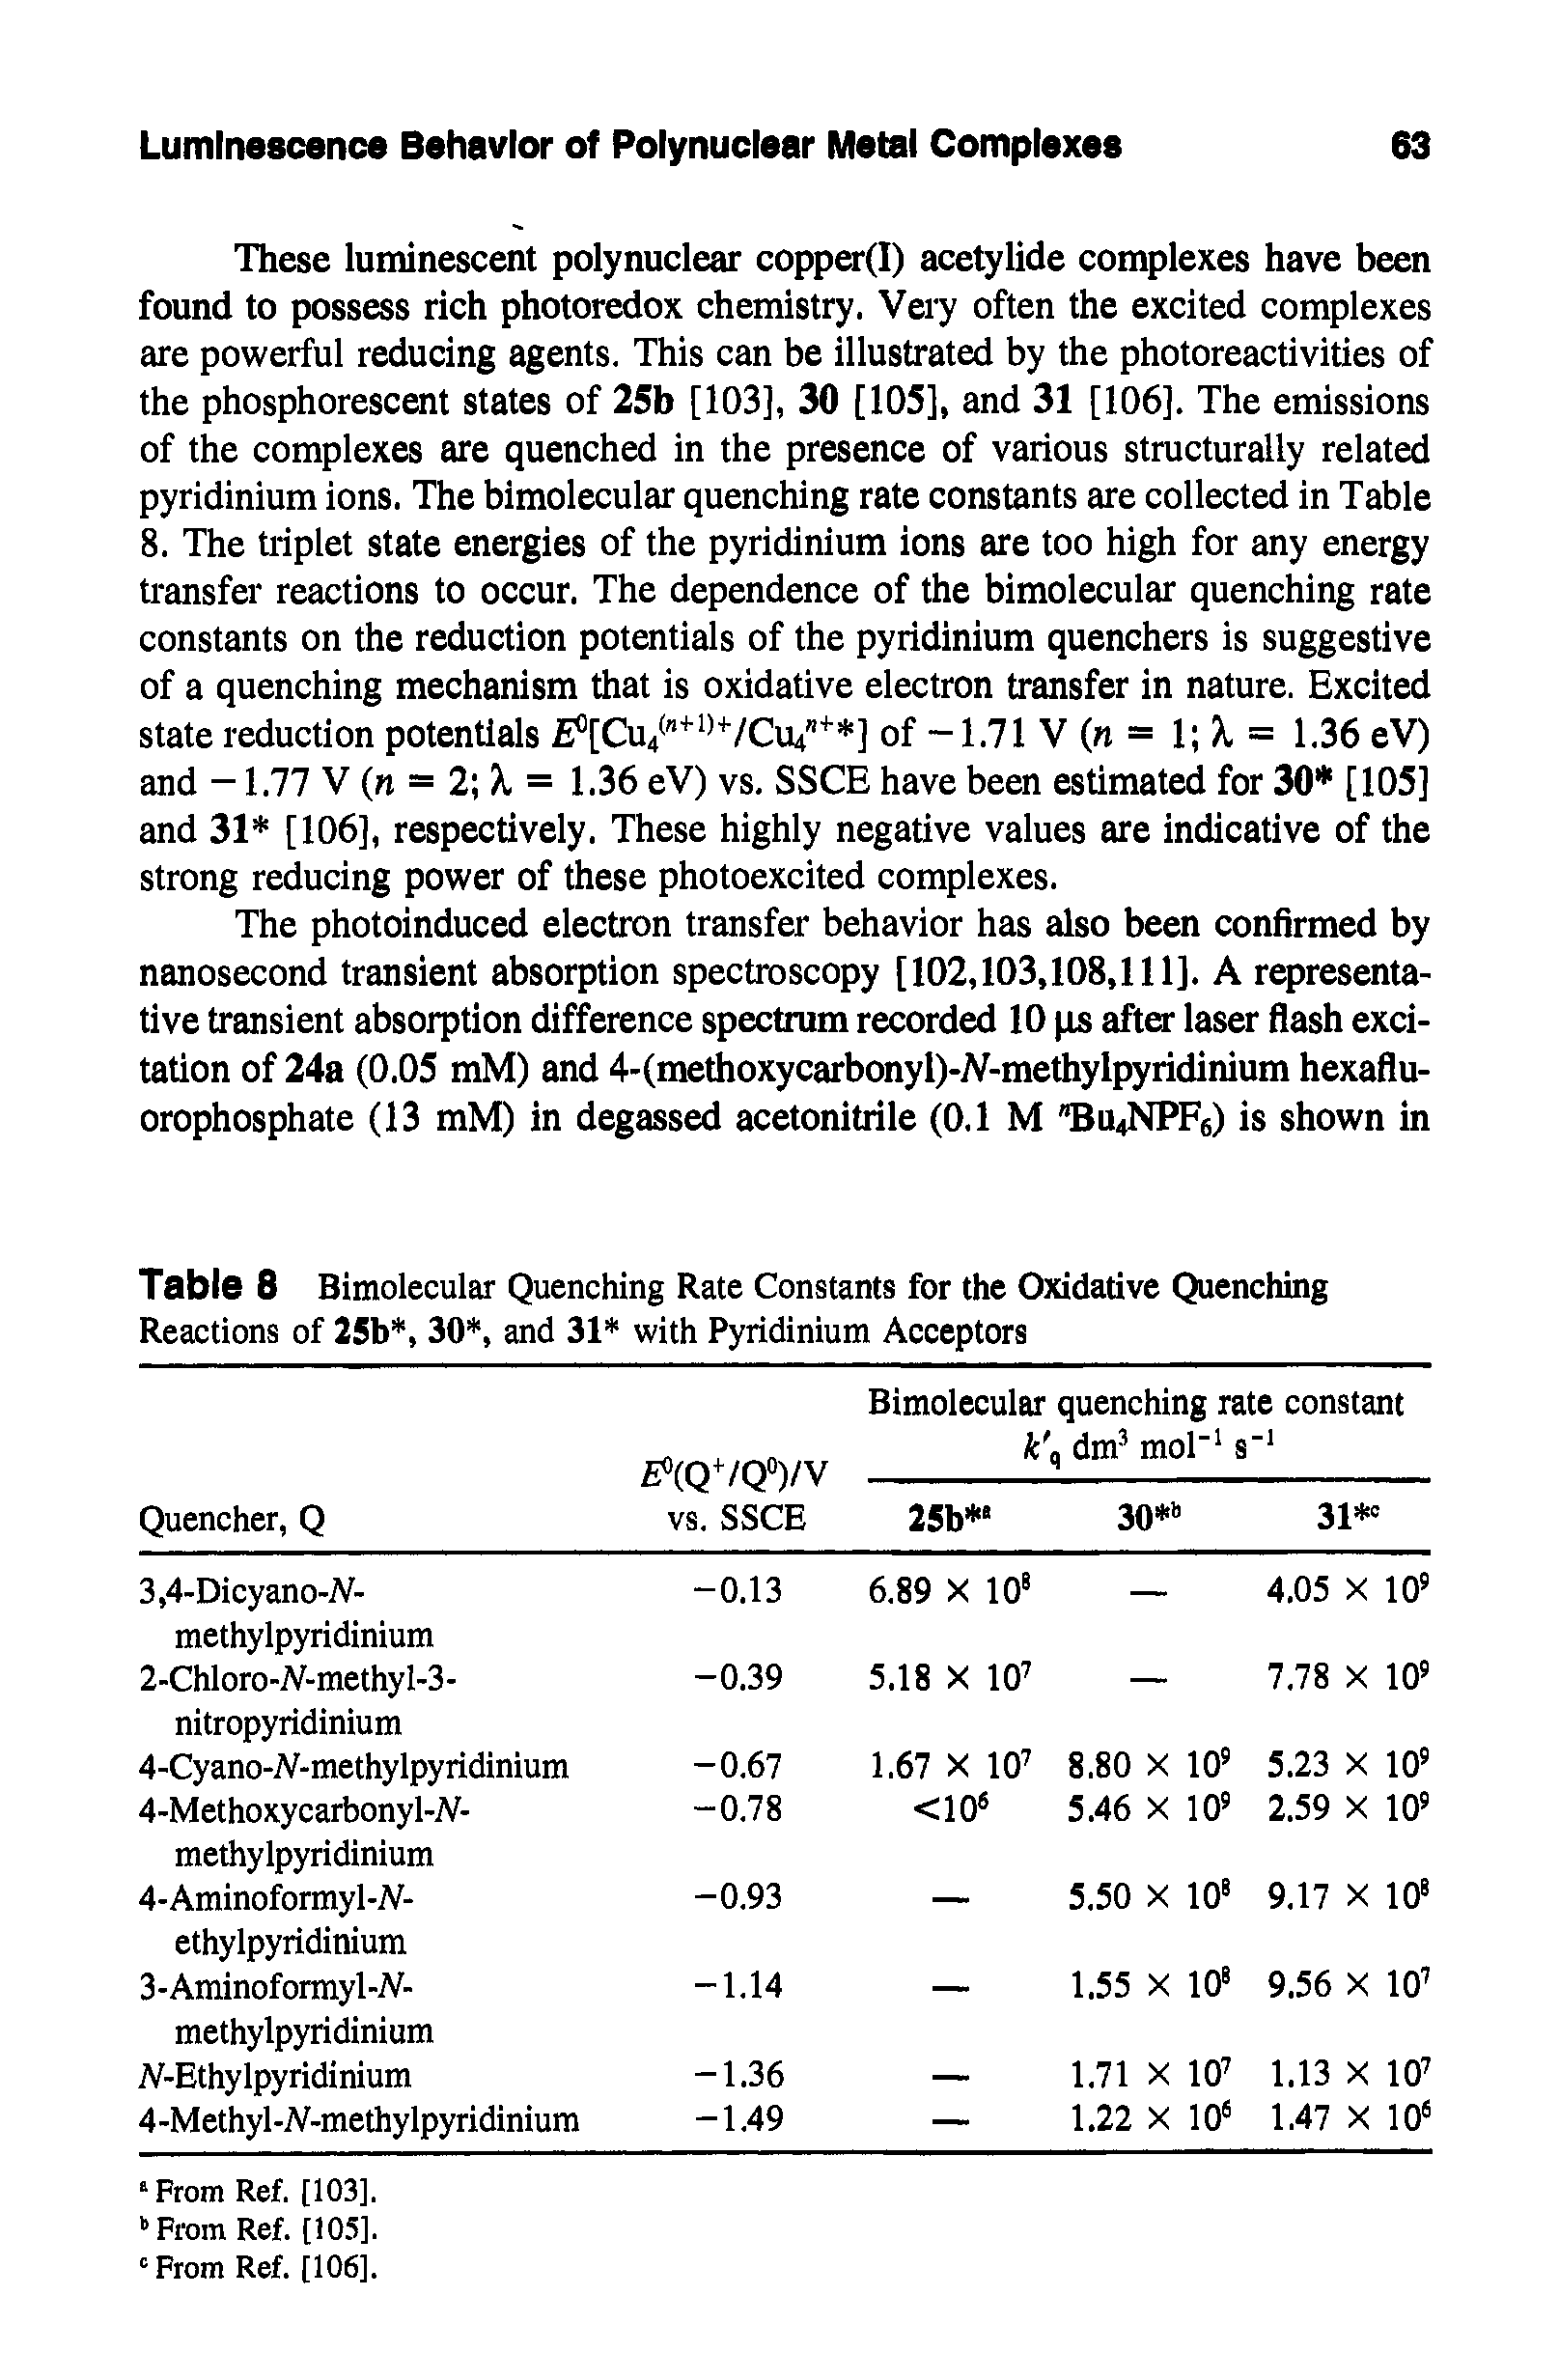 Table 8 Bimolecular Quenching Rate Constants for the Oxidadve Quenching Reactions of 25b, 30, and 31 with Pyridinium Acceptors...